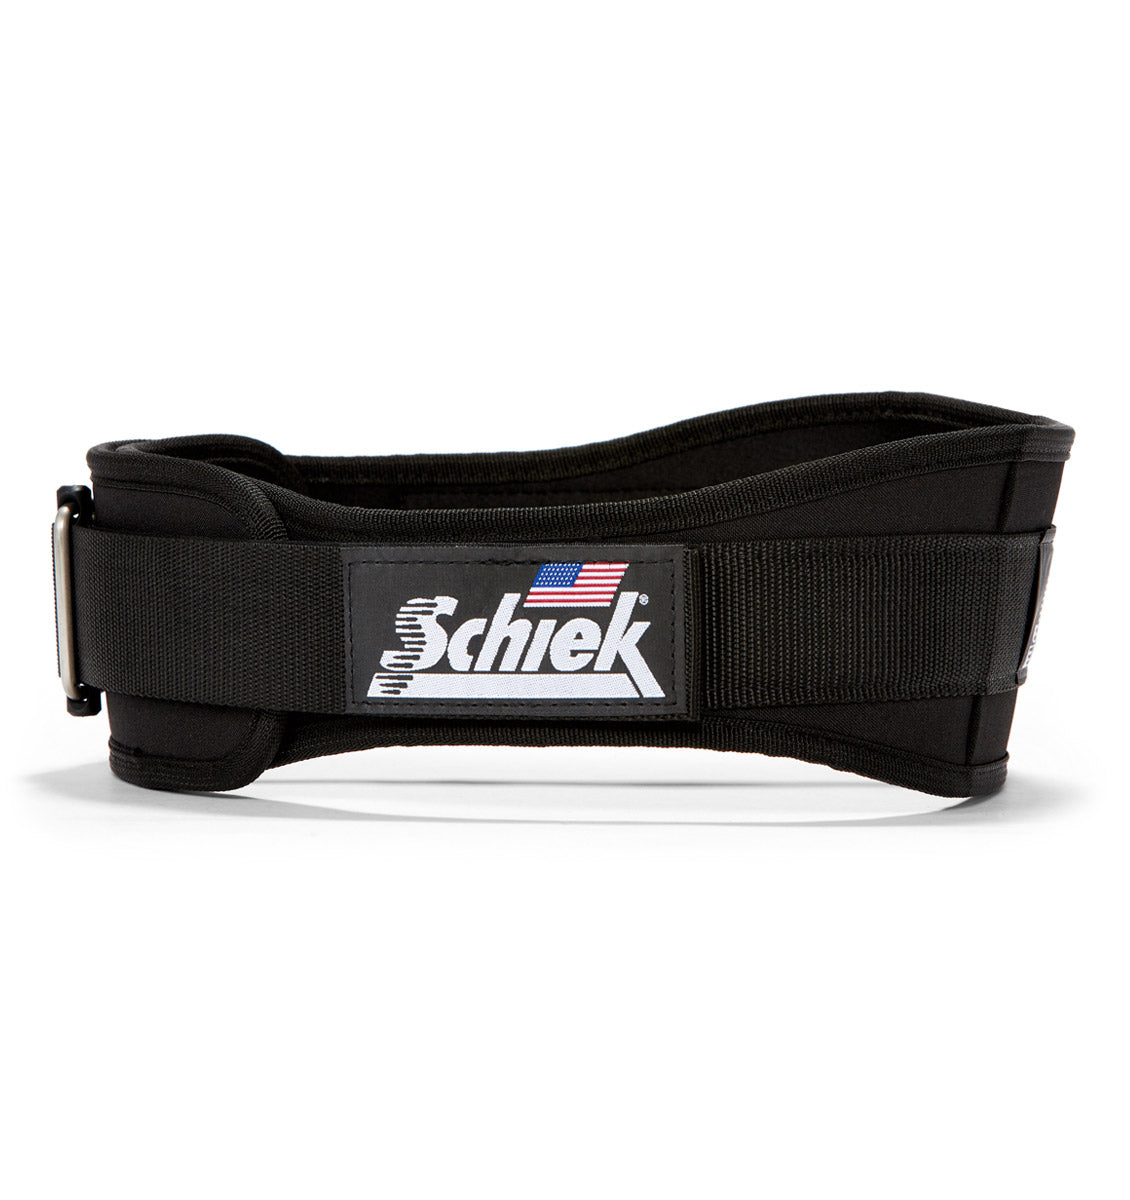 WHAT WORKOUT BELT ADDS COMFORT AND SUPPORT? SCHIEK MODEL 2004, HERE IS WHY...